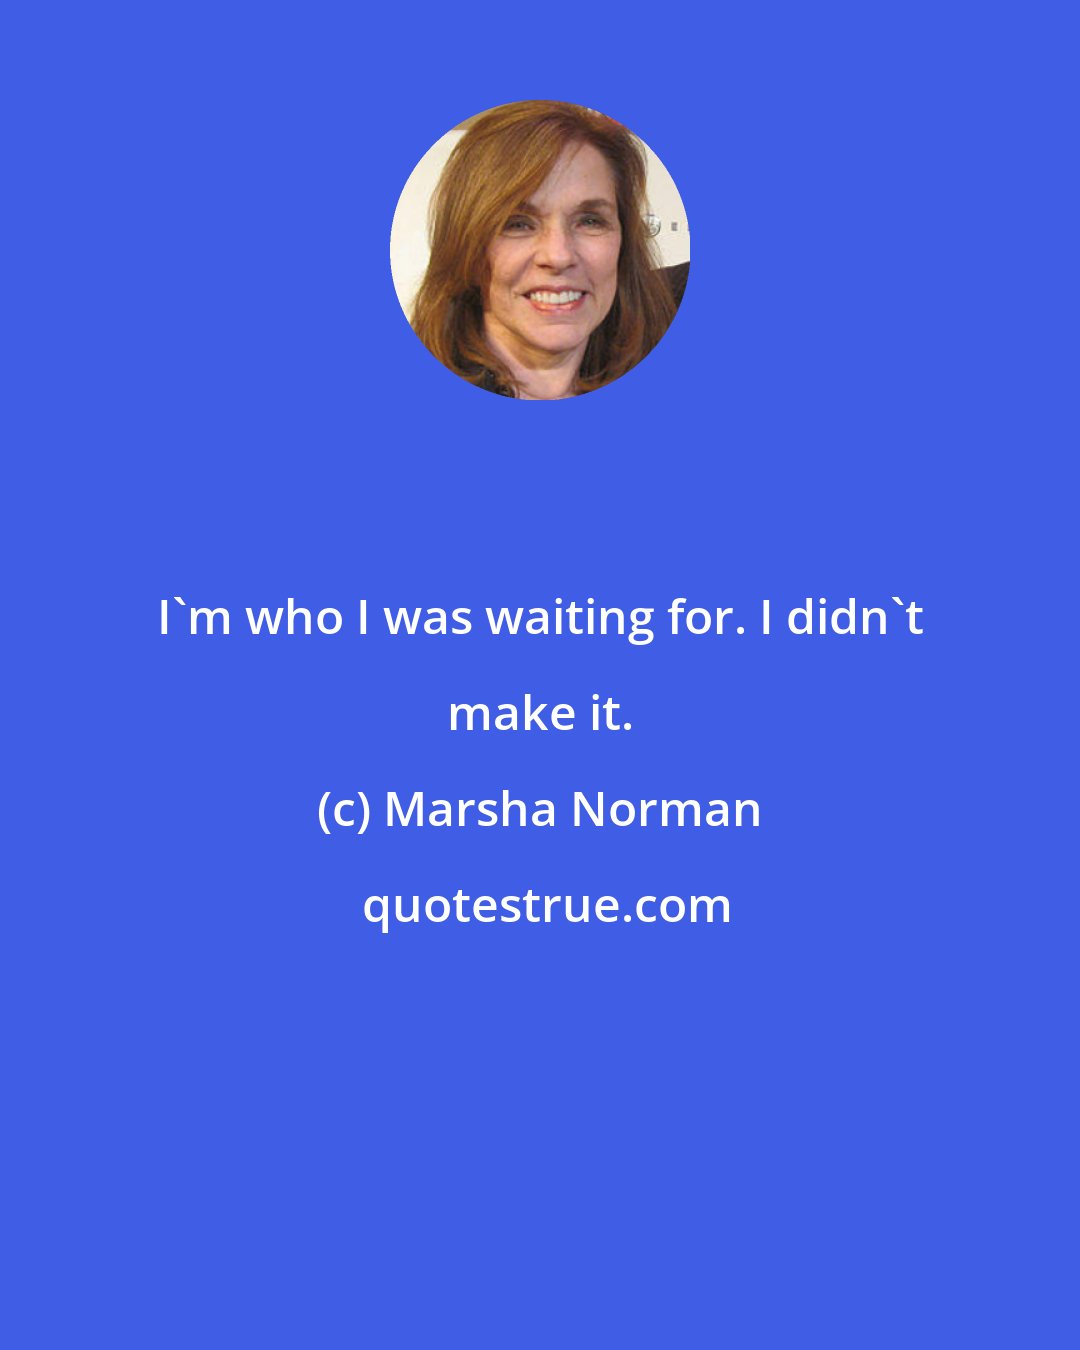 Marsha Norman: I'm who I was waiting for. I didn't make it.